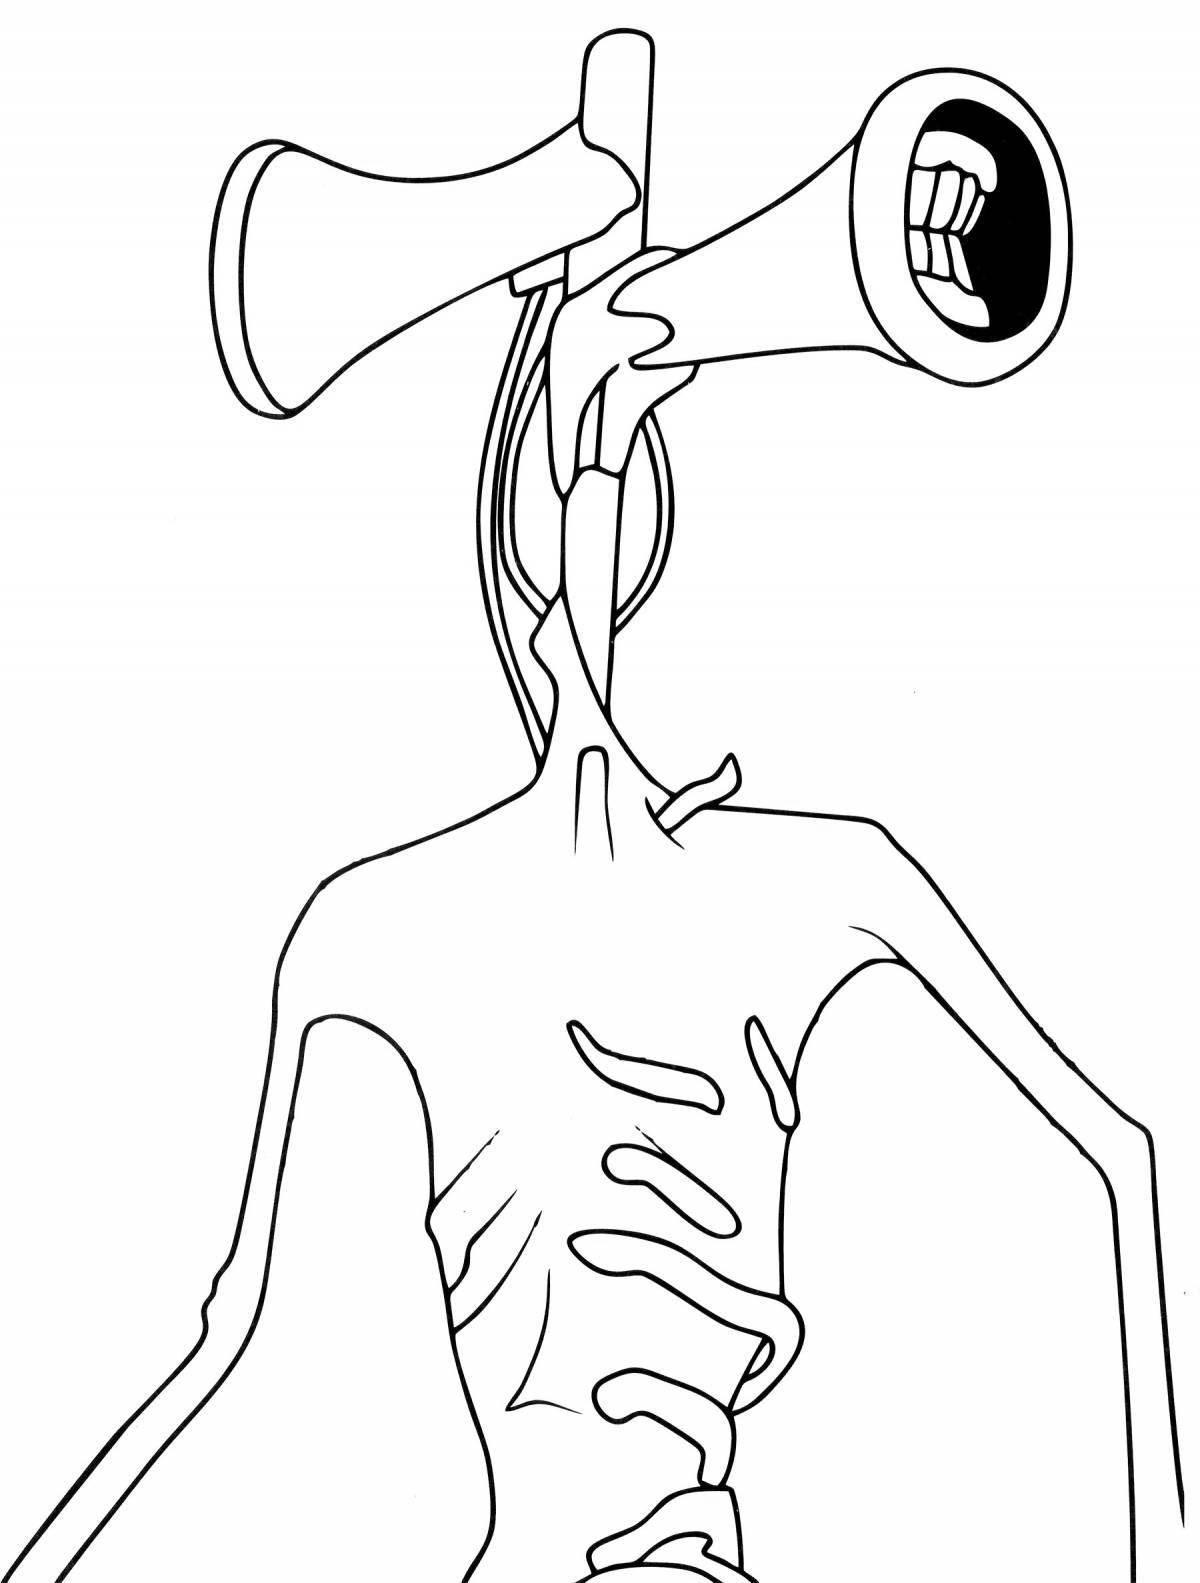 Lighting siren head coloring page for boys